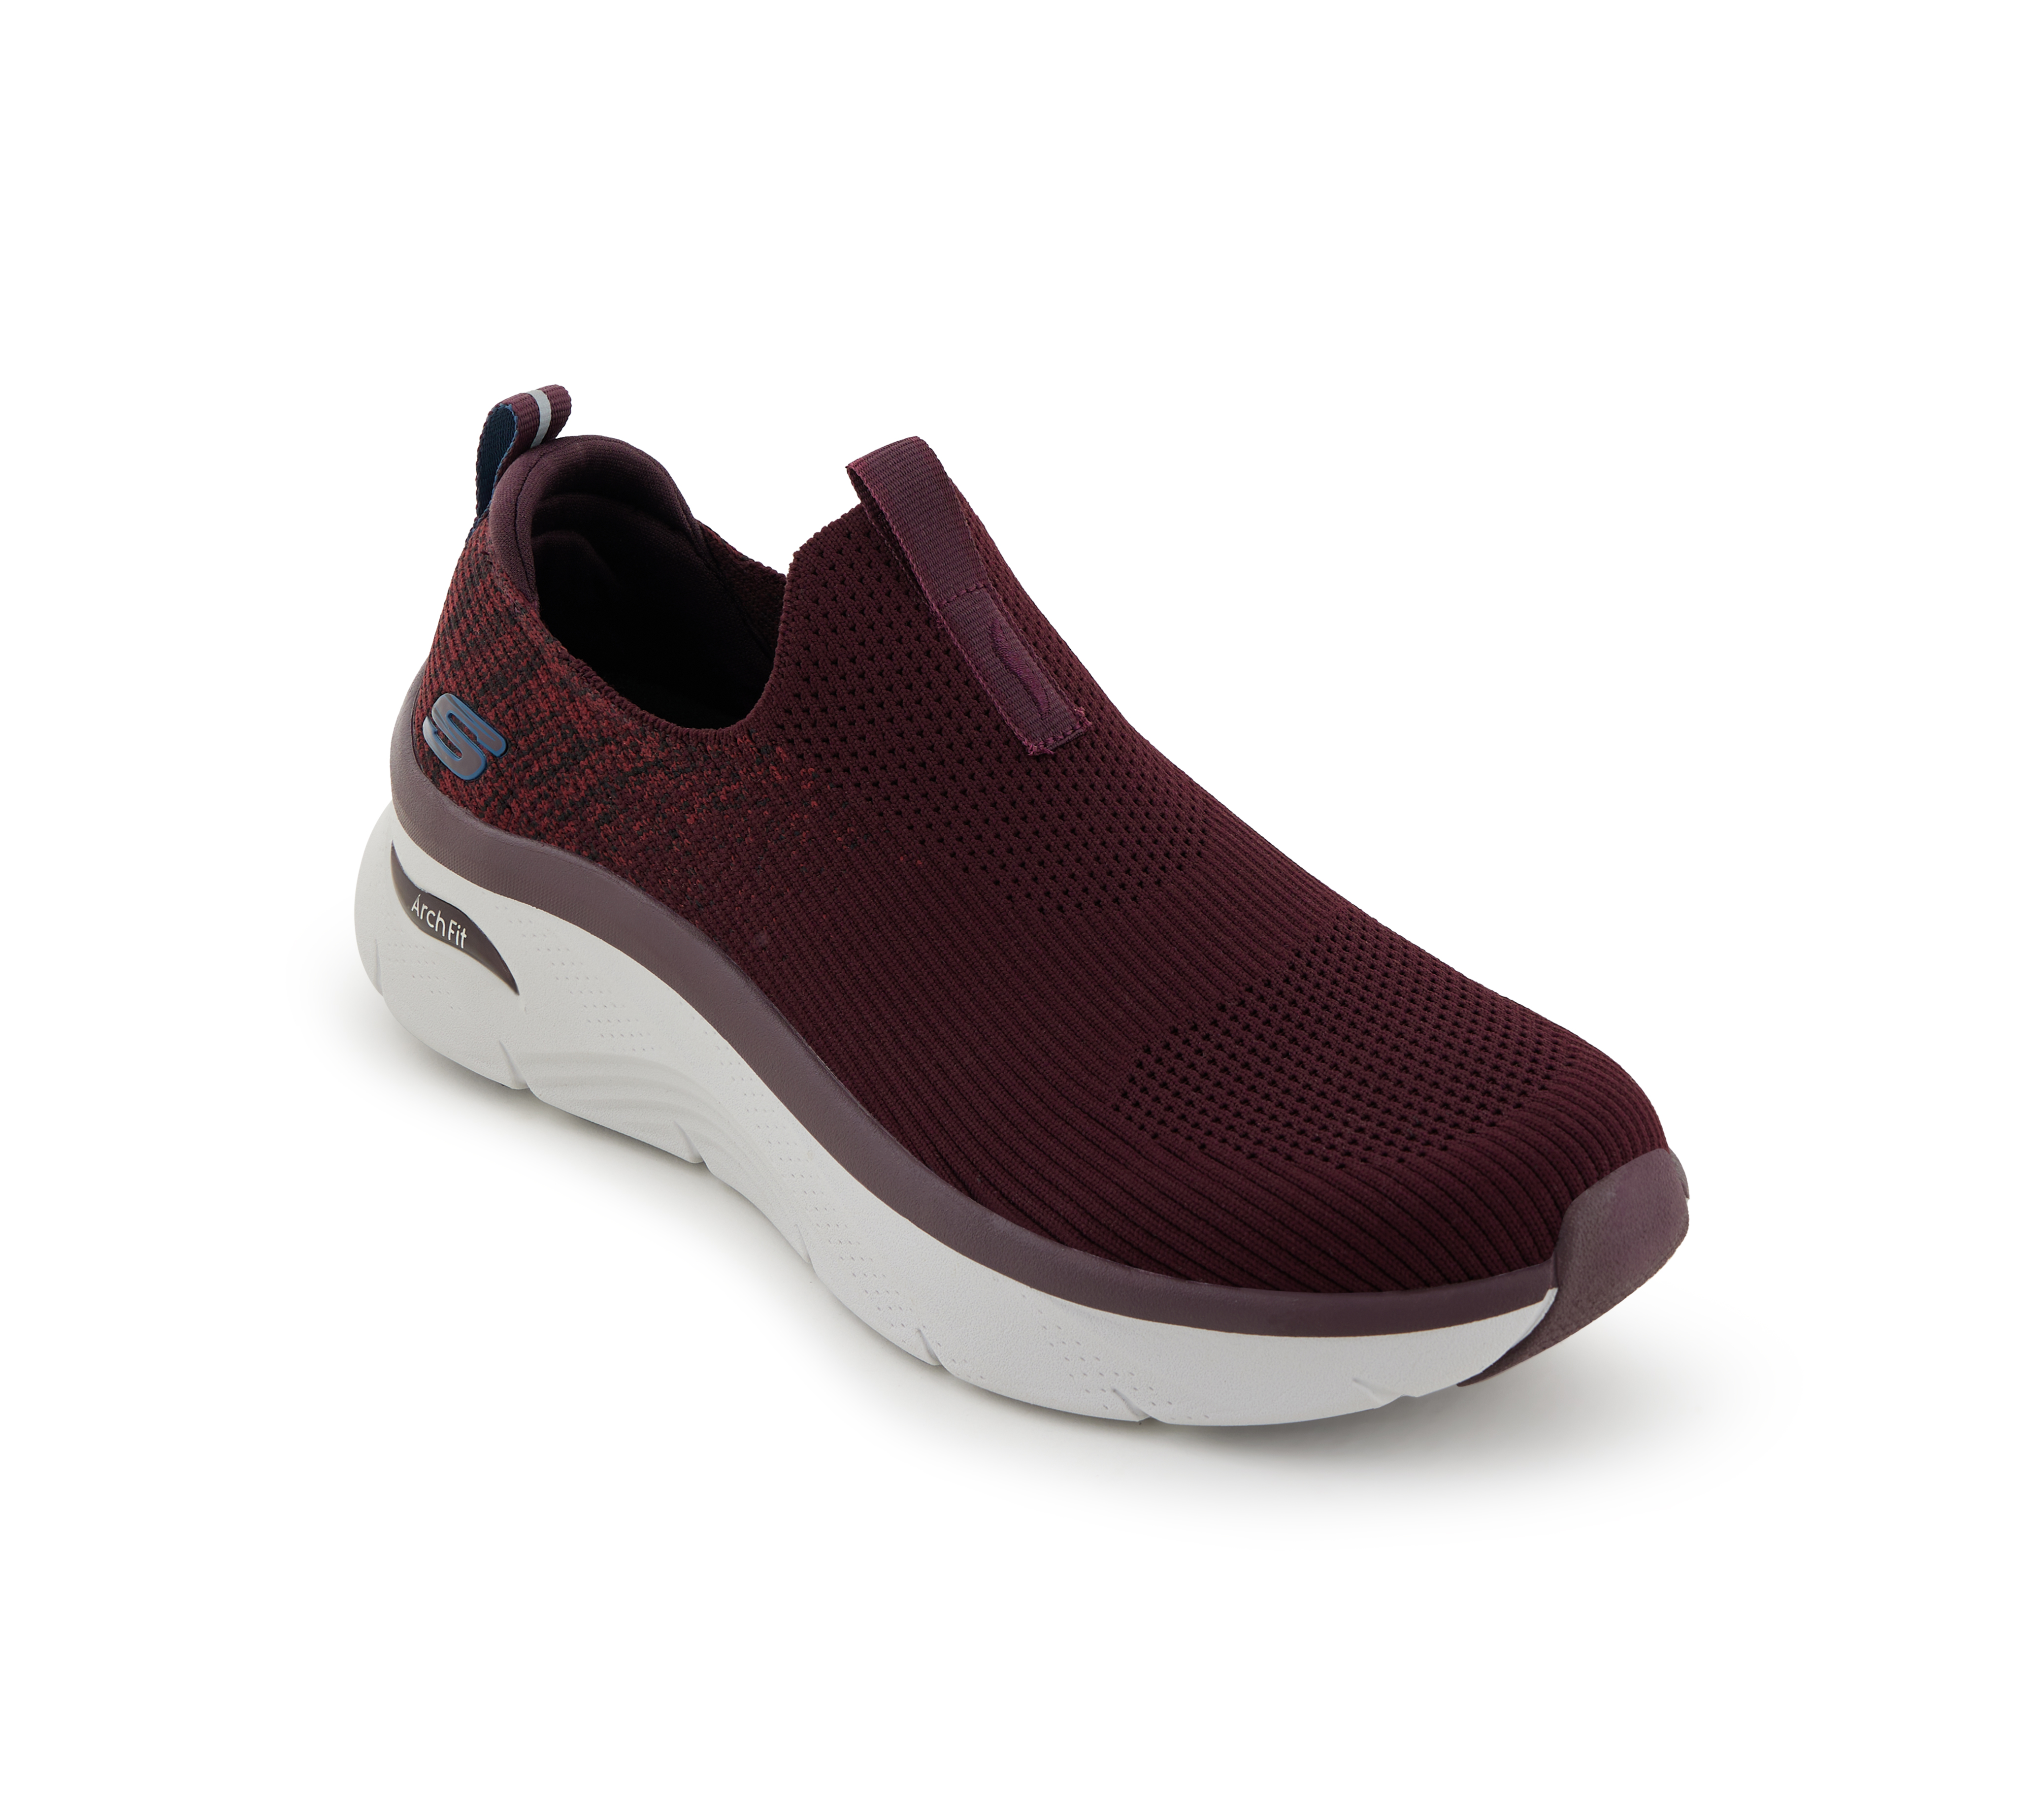 ARCH FIT D'LUX-KEY JOURNEY, BBURGUNDY Footwear Lateral View